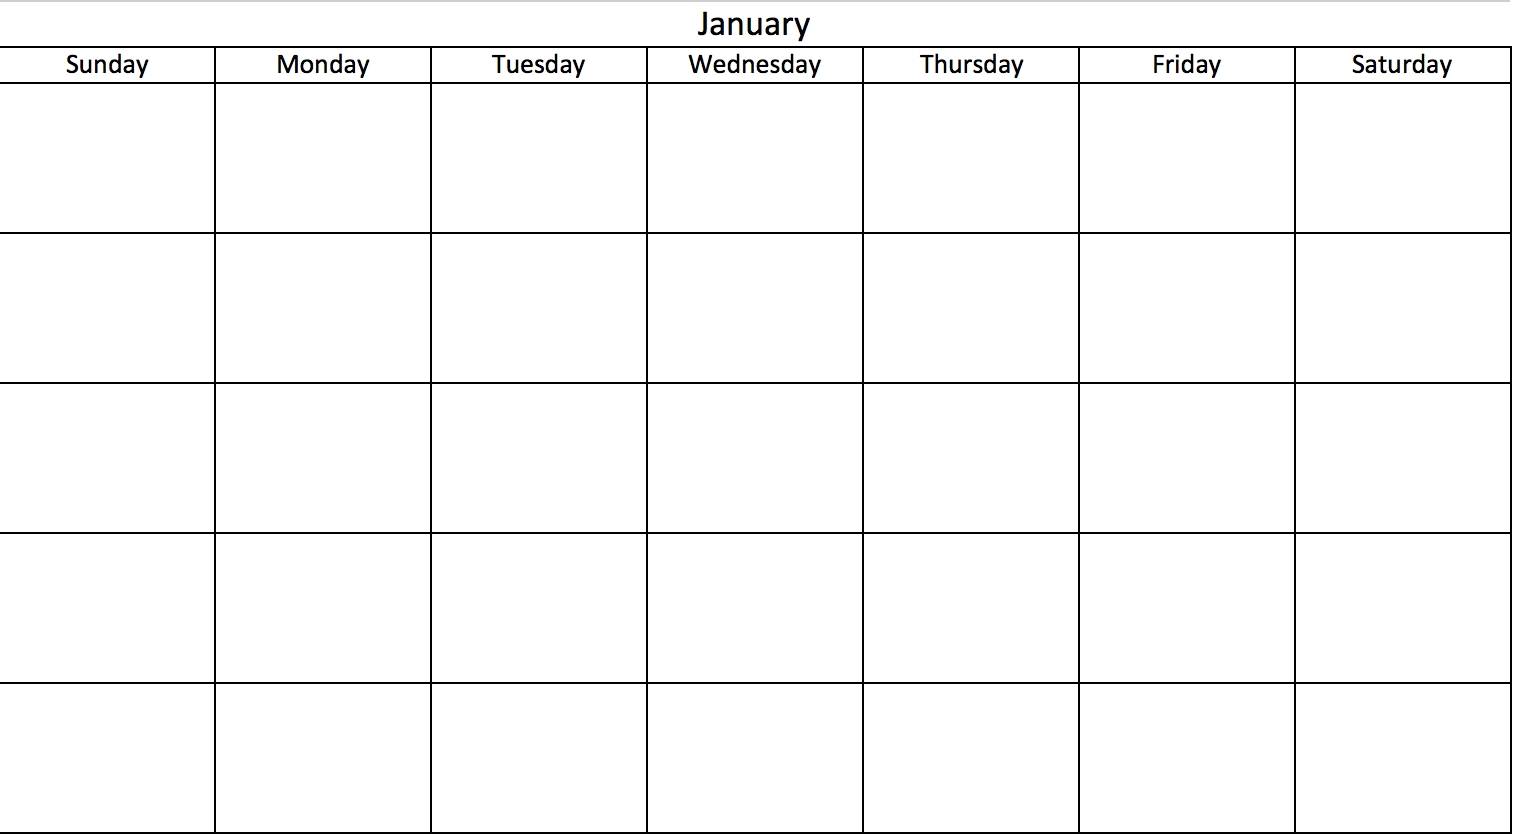 Make A 2018 Calendar In Excel (Includes Free Template)  Blank Calendar With Only Weekdays